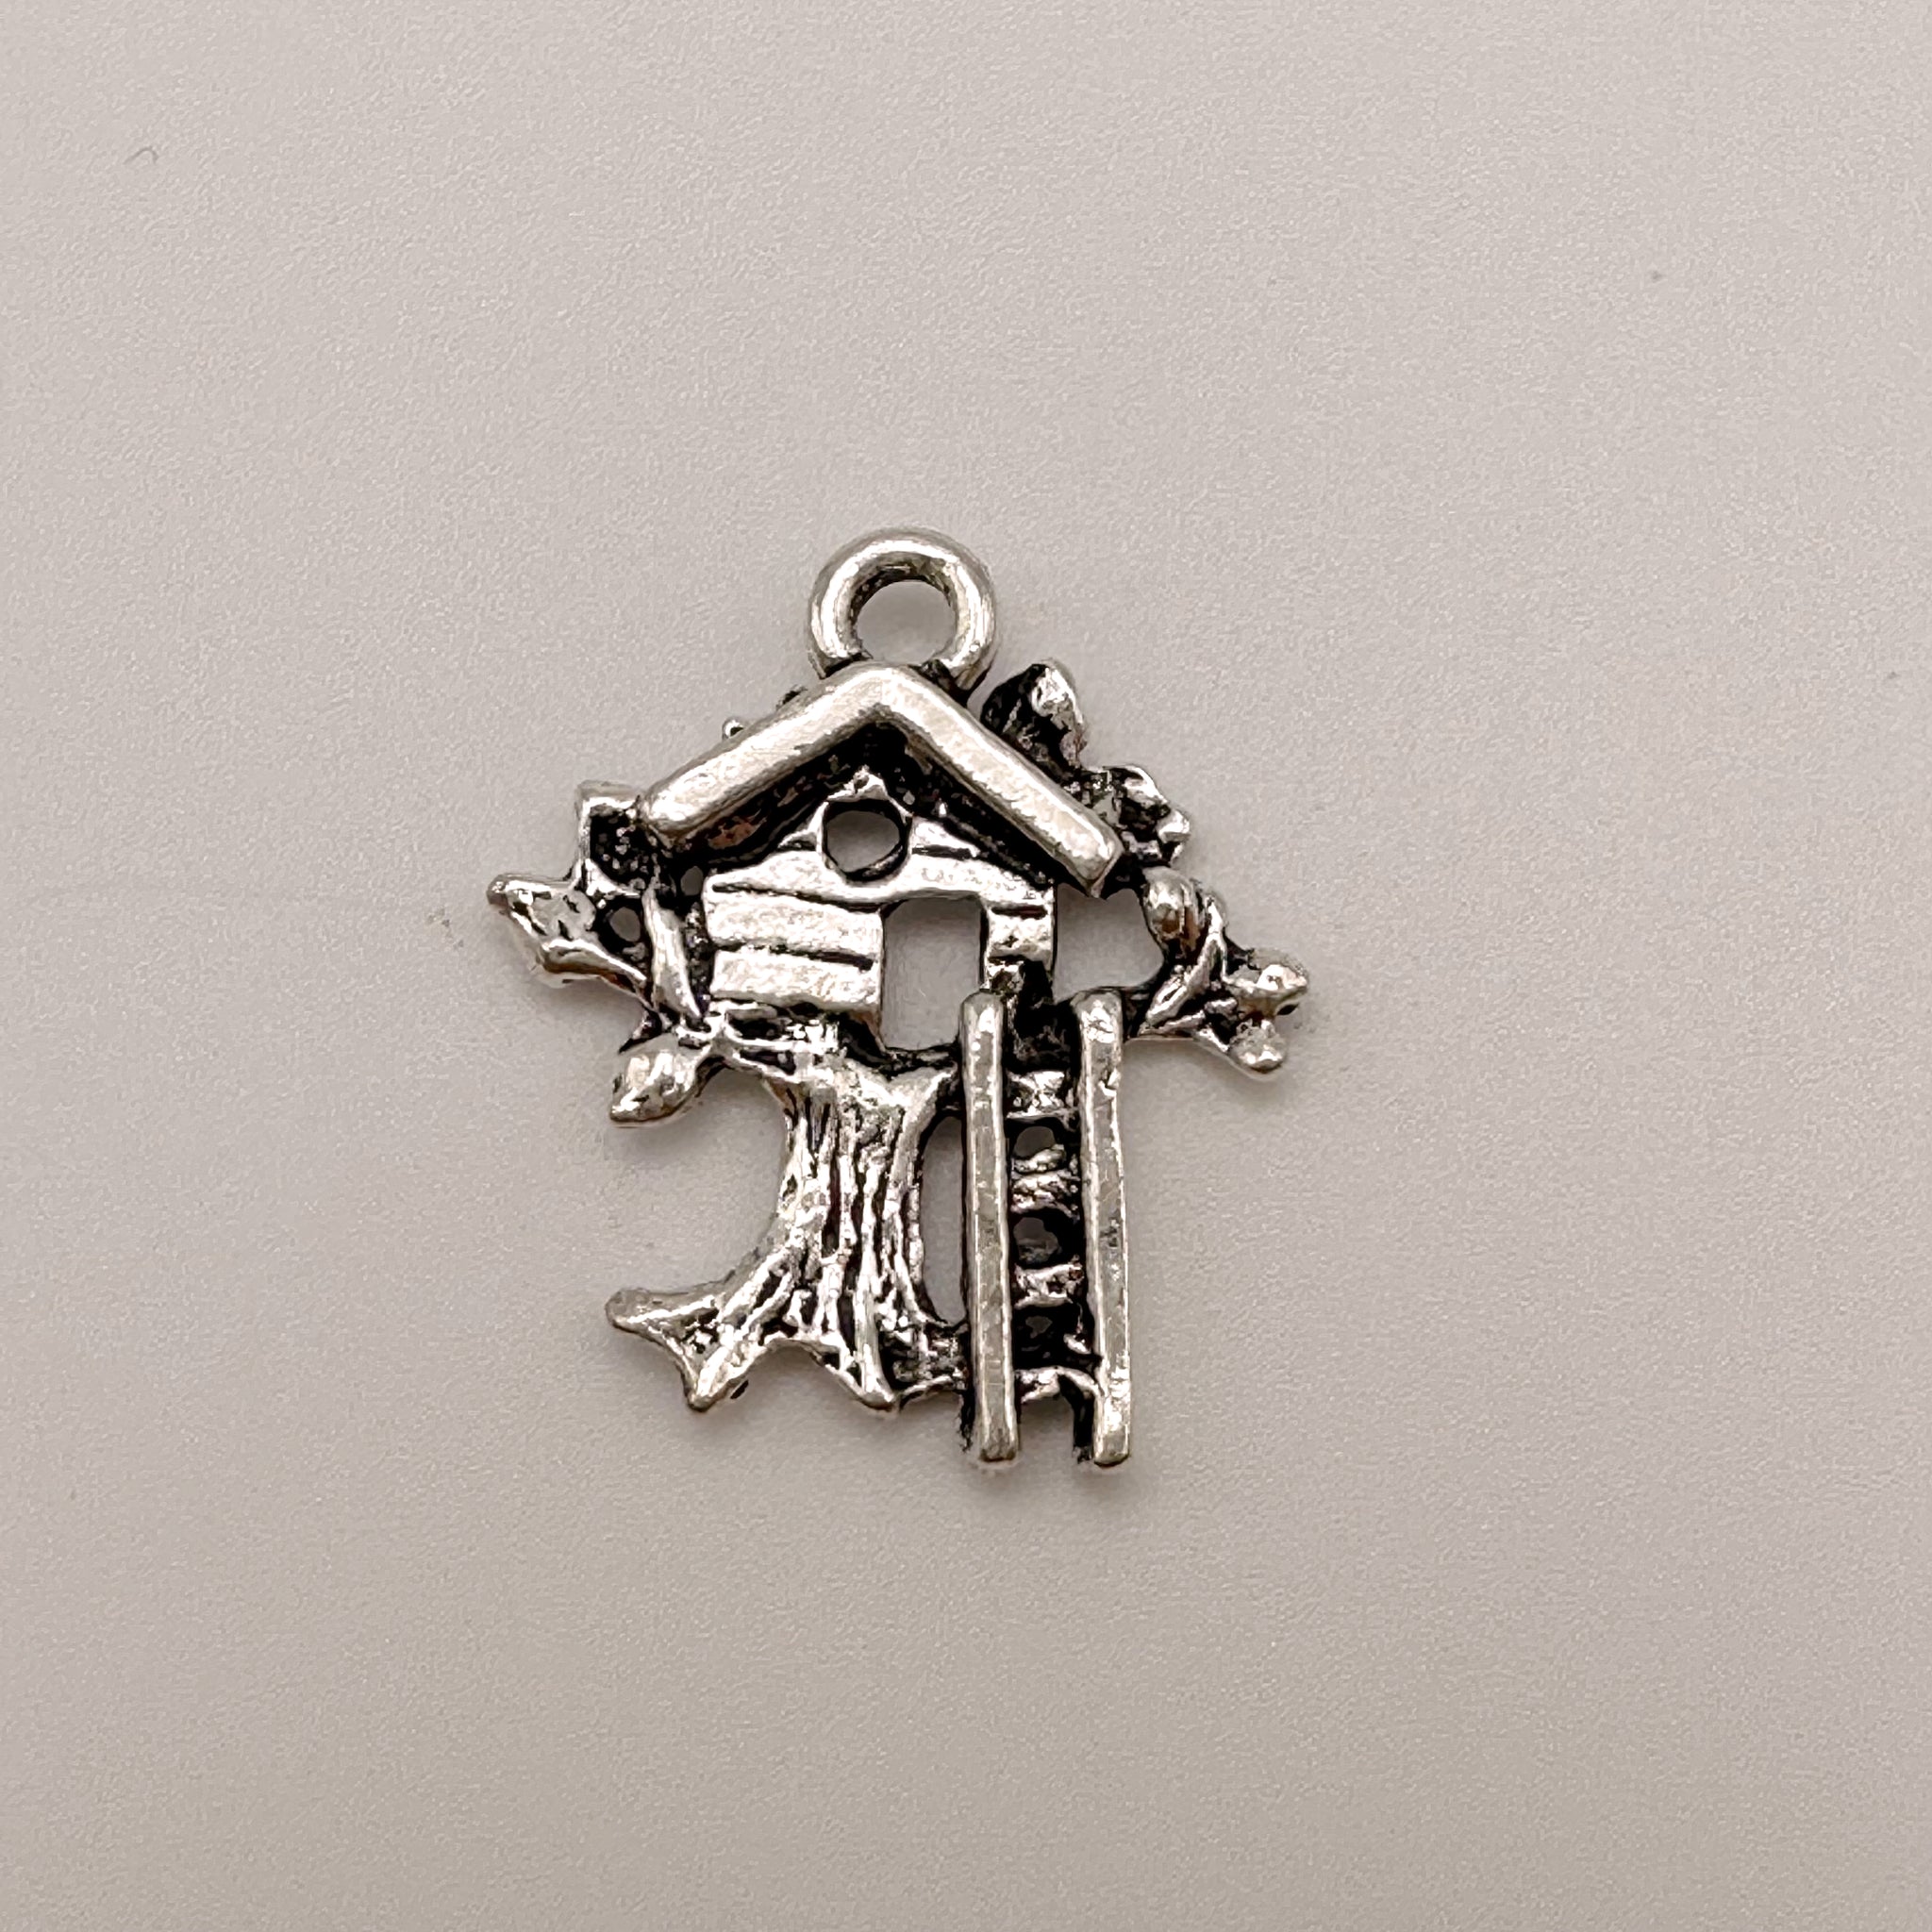 Treehouse Charm - Silver